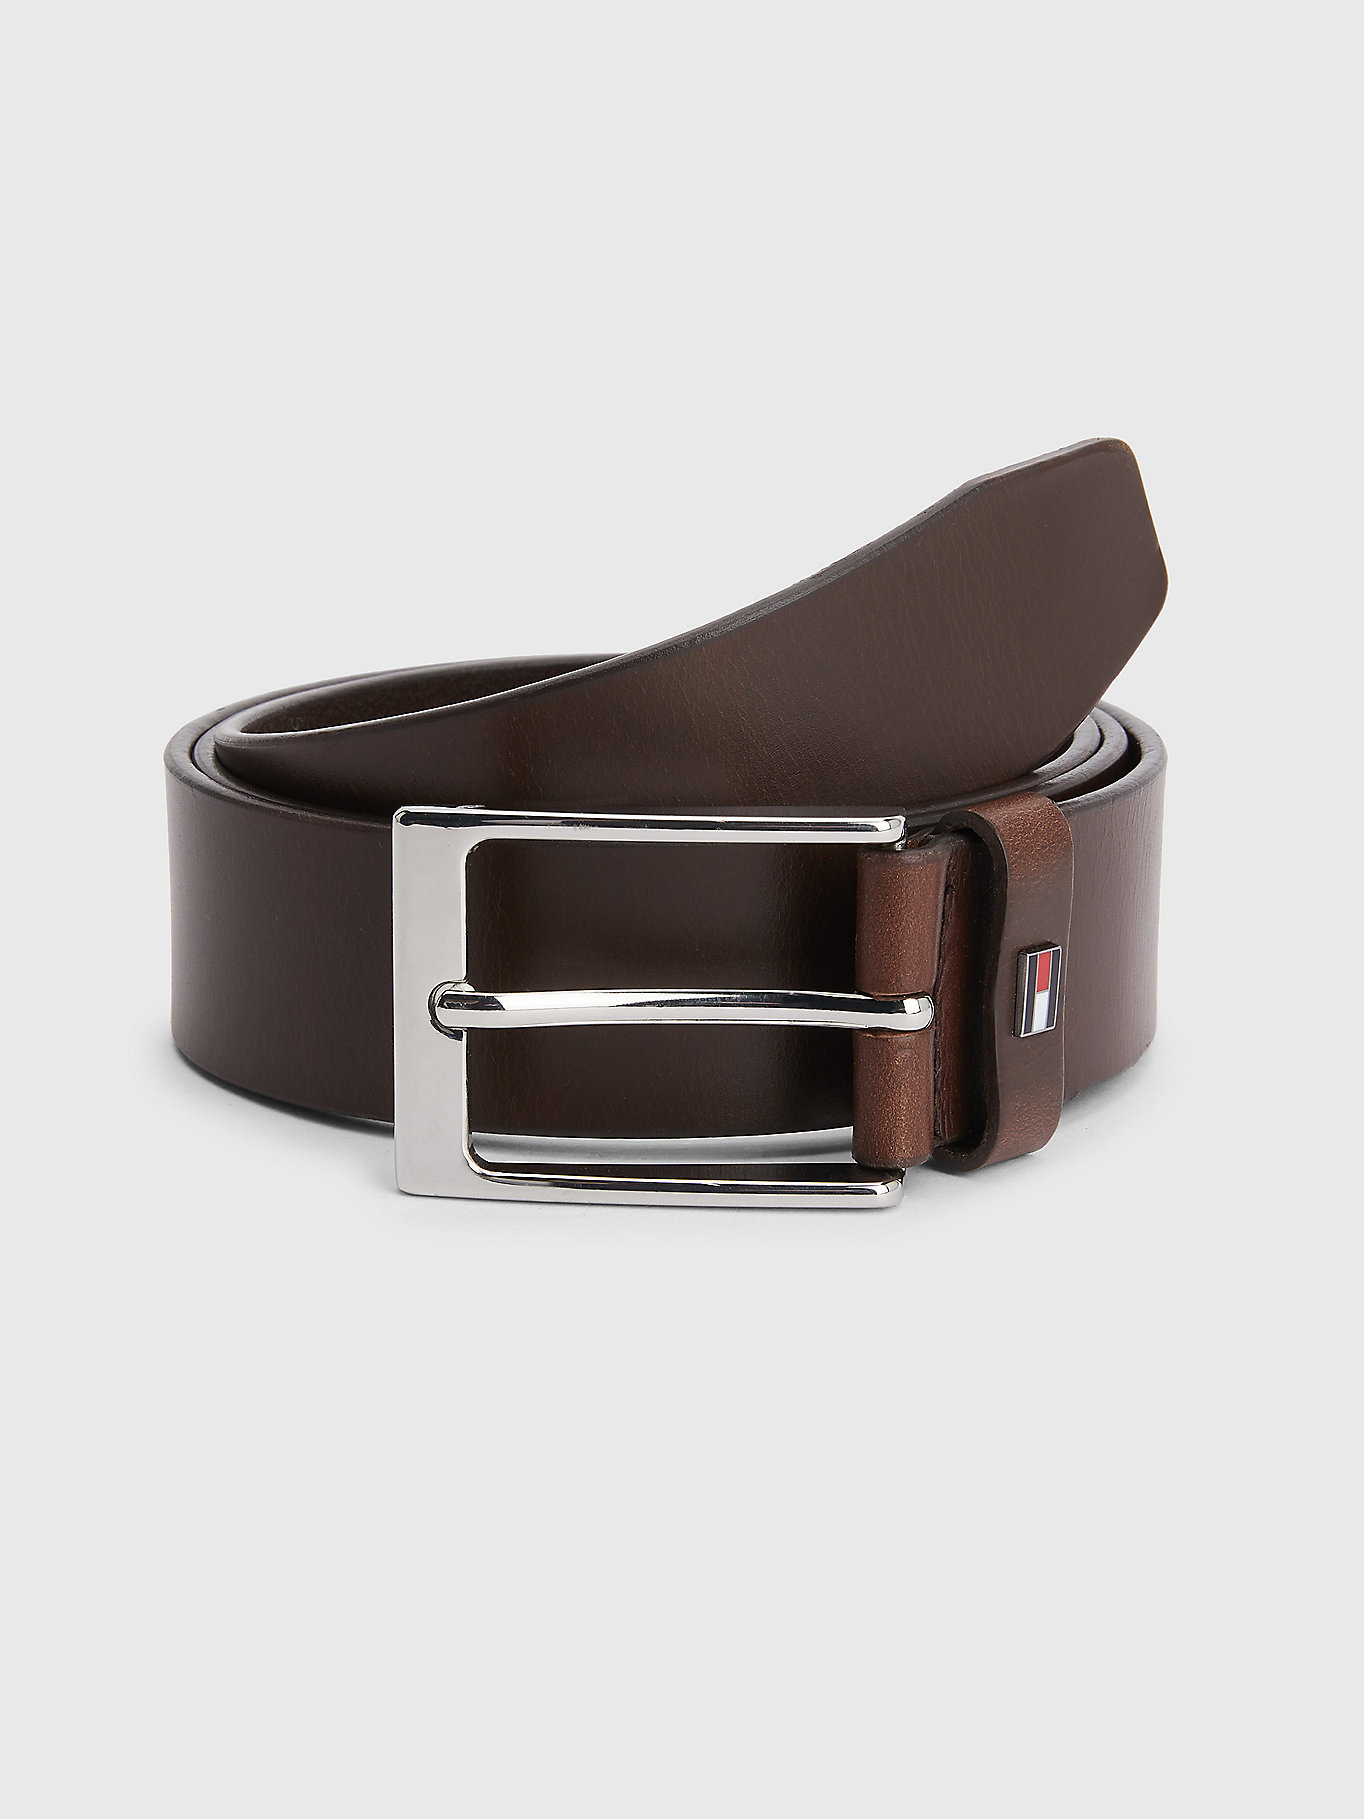 TOMMY HILFIGER BLACK BELT | Morans Menswear and Clothing, Thurles, Co ...